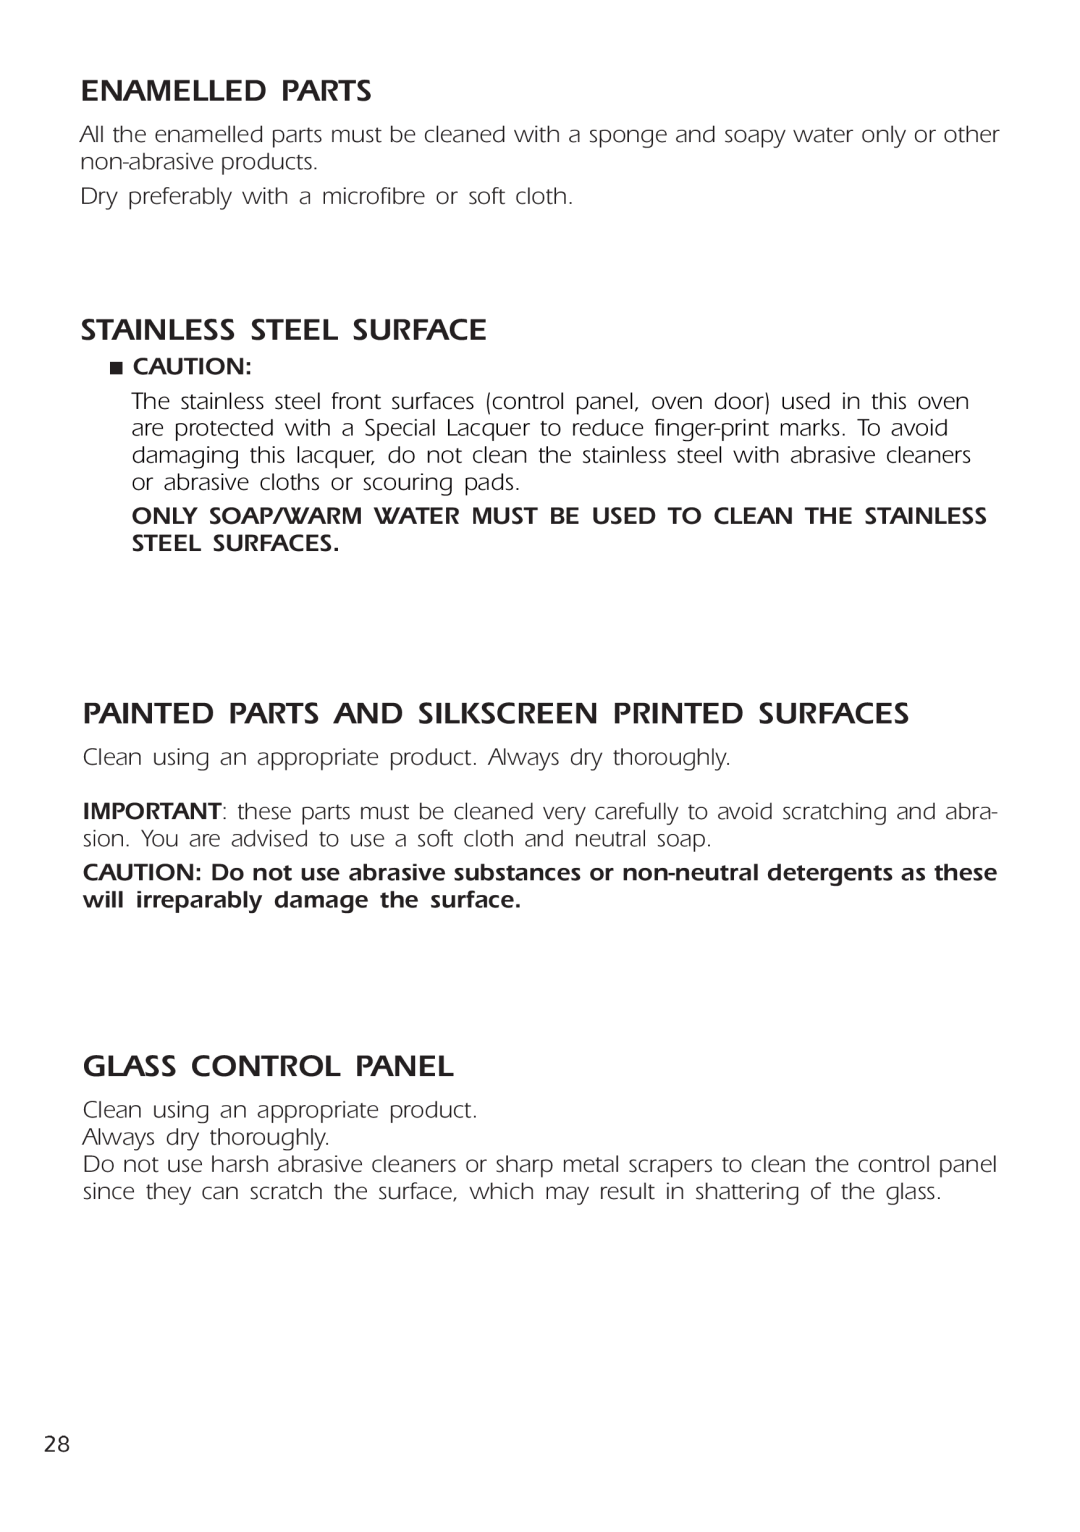 DeLonghi DE 91 MPS manual Enamelled Parts, Stainless Steel Surface, Painted Parts And Silkscreen Printed Surfaces 